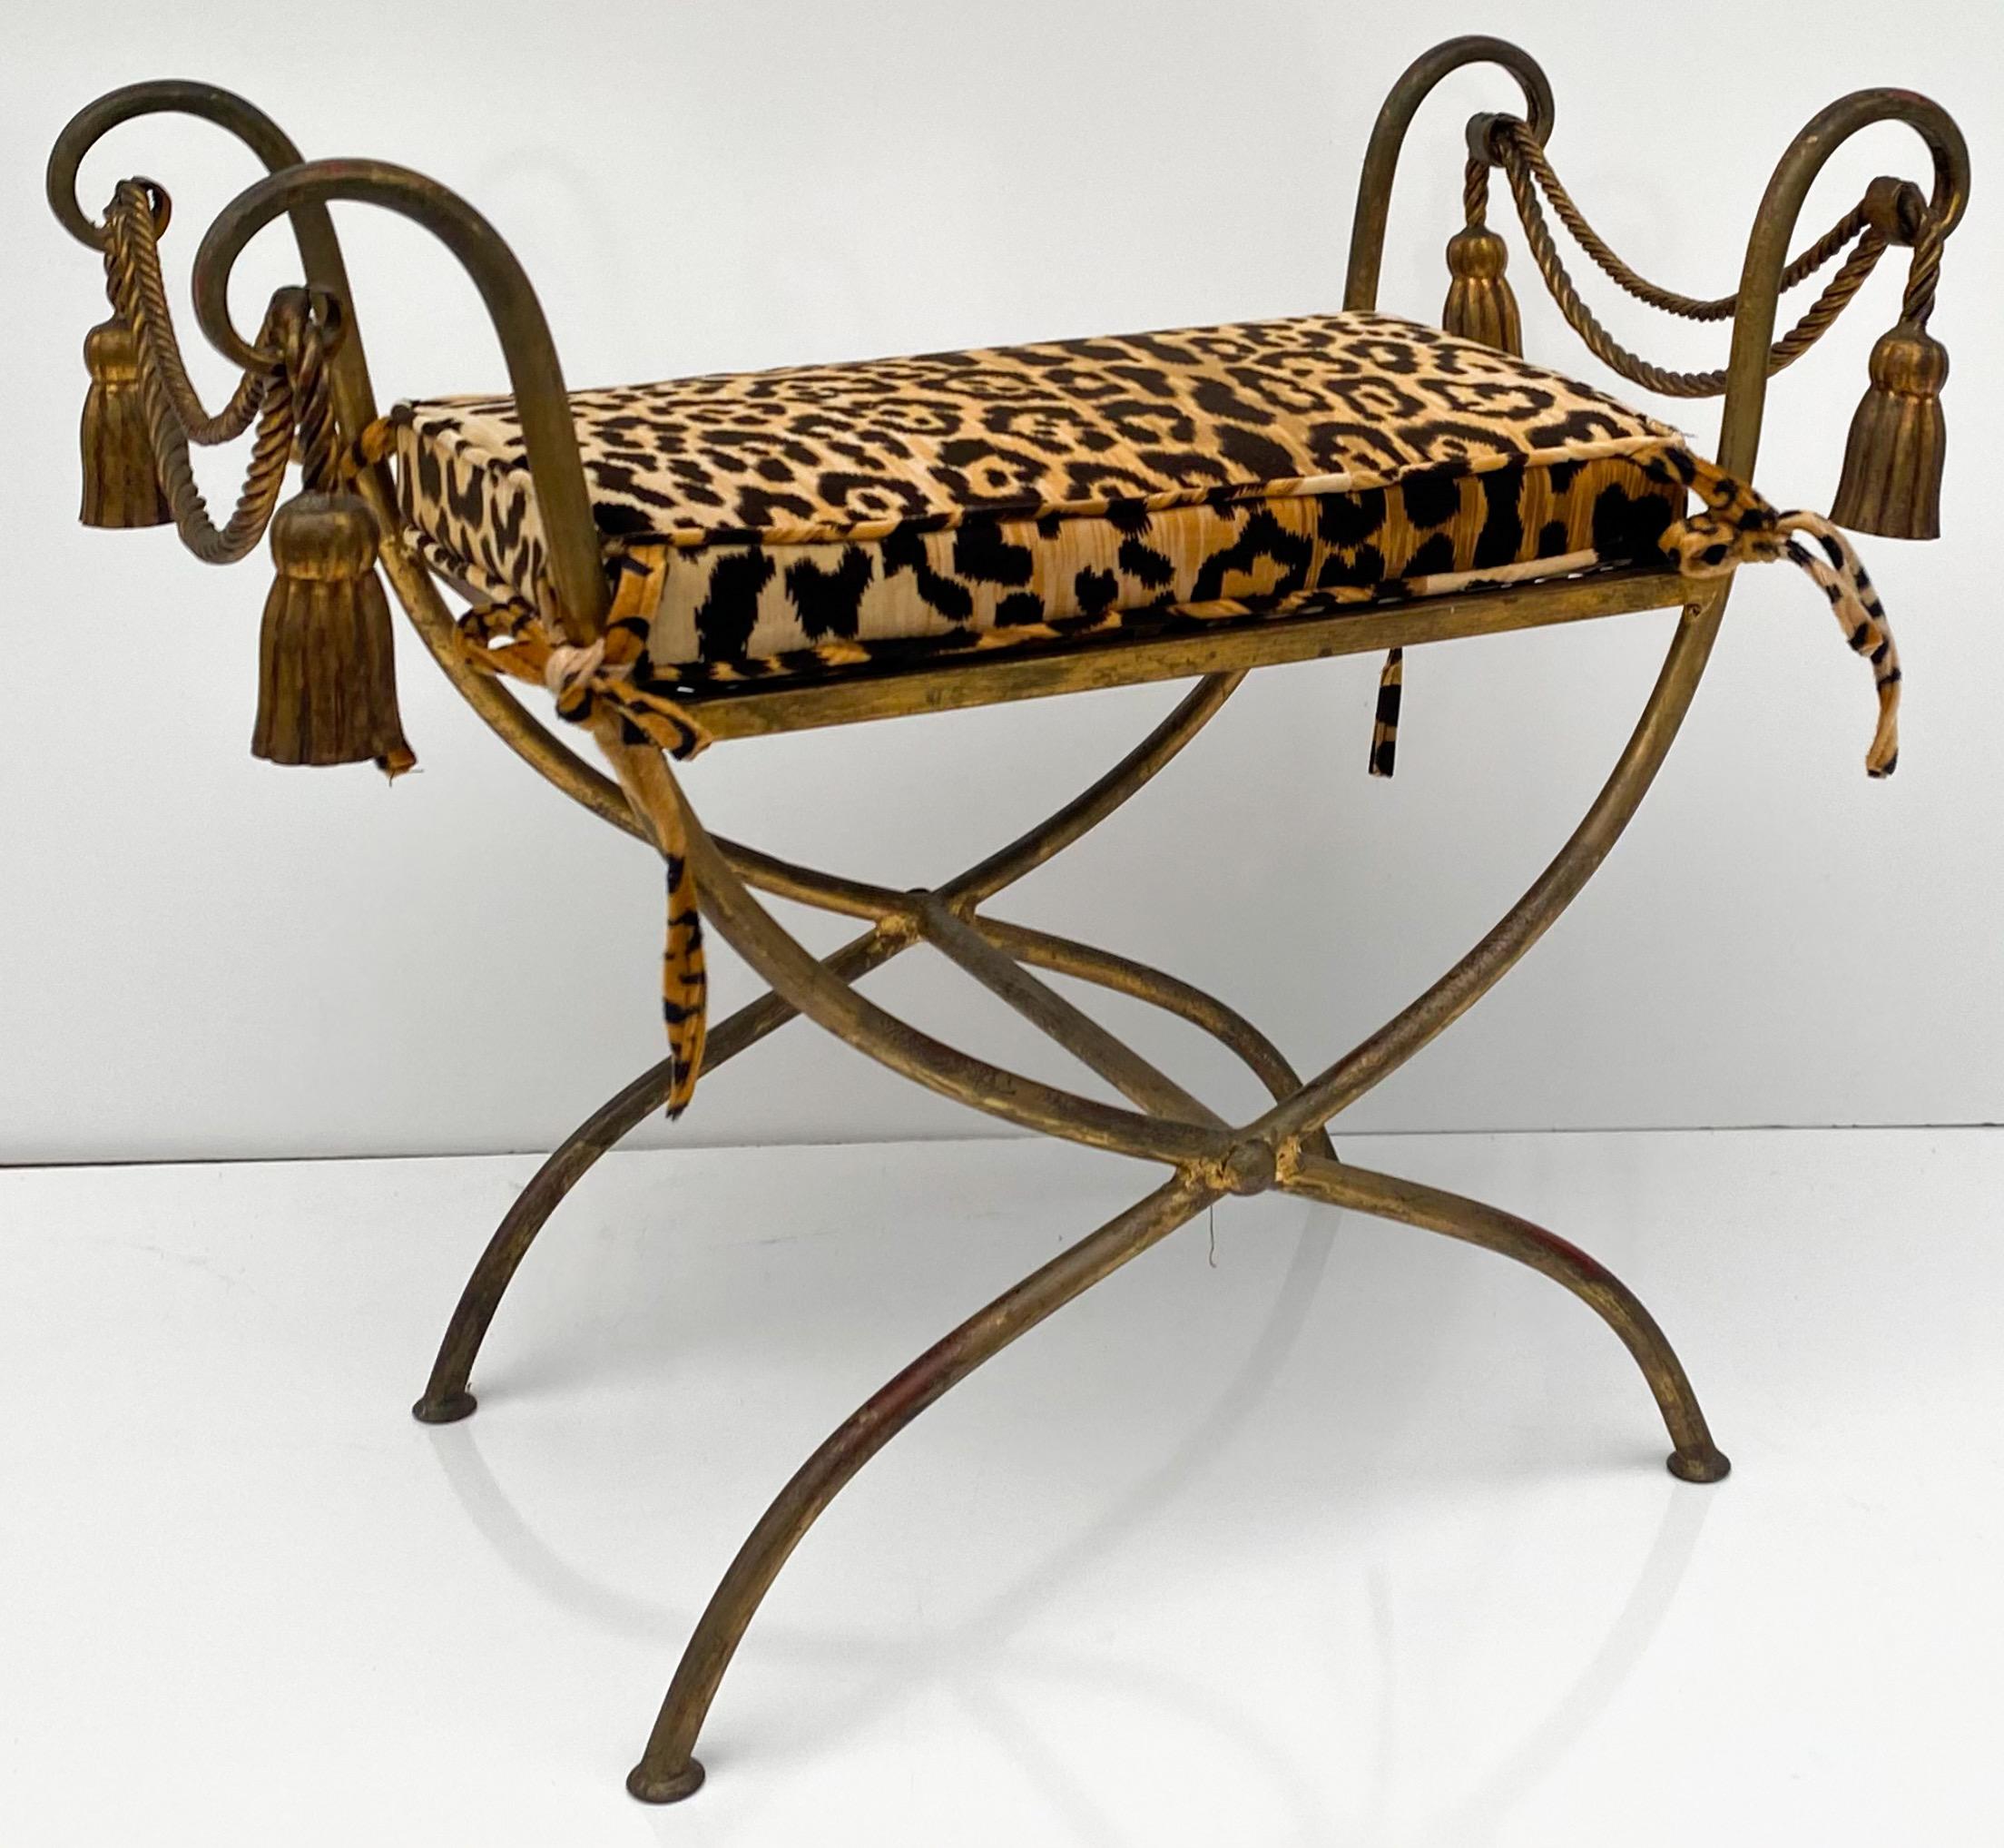 Hollywood Regency Italian Gilt Metal Tassel Bench in Leopard, a Pair In Good Condition For Sale In Kennesaw, GA